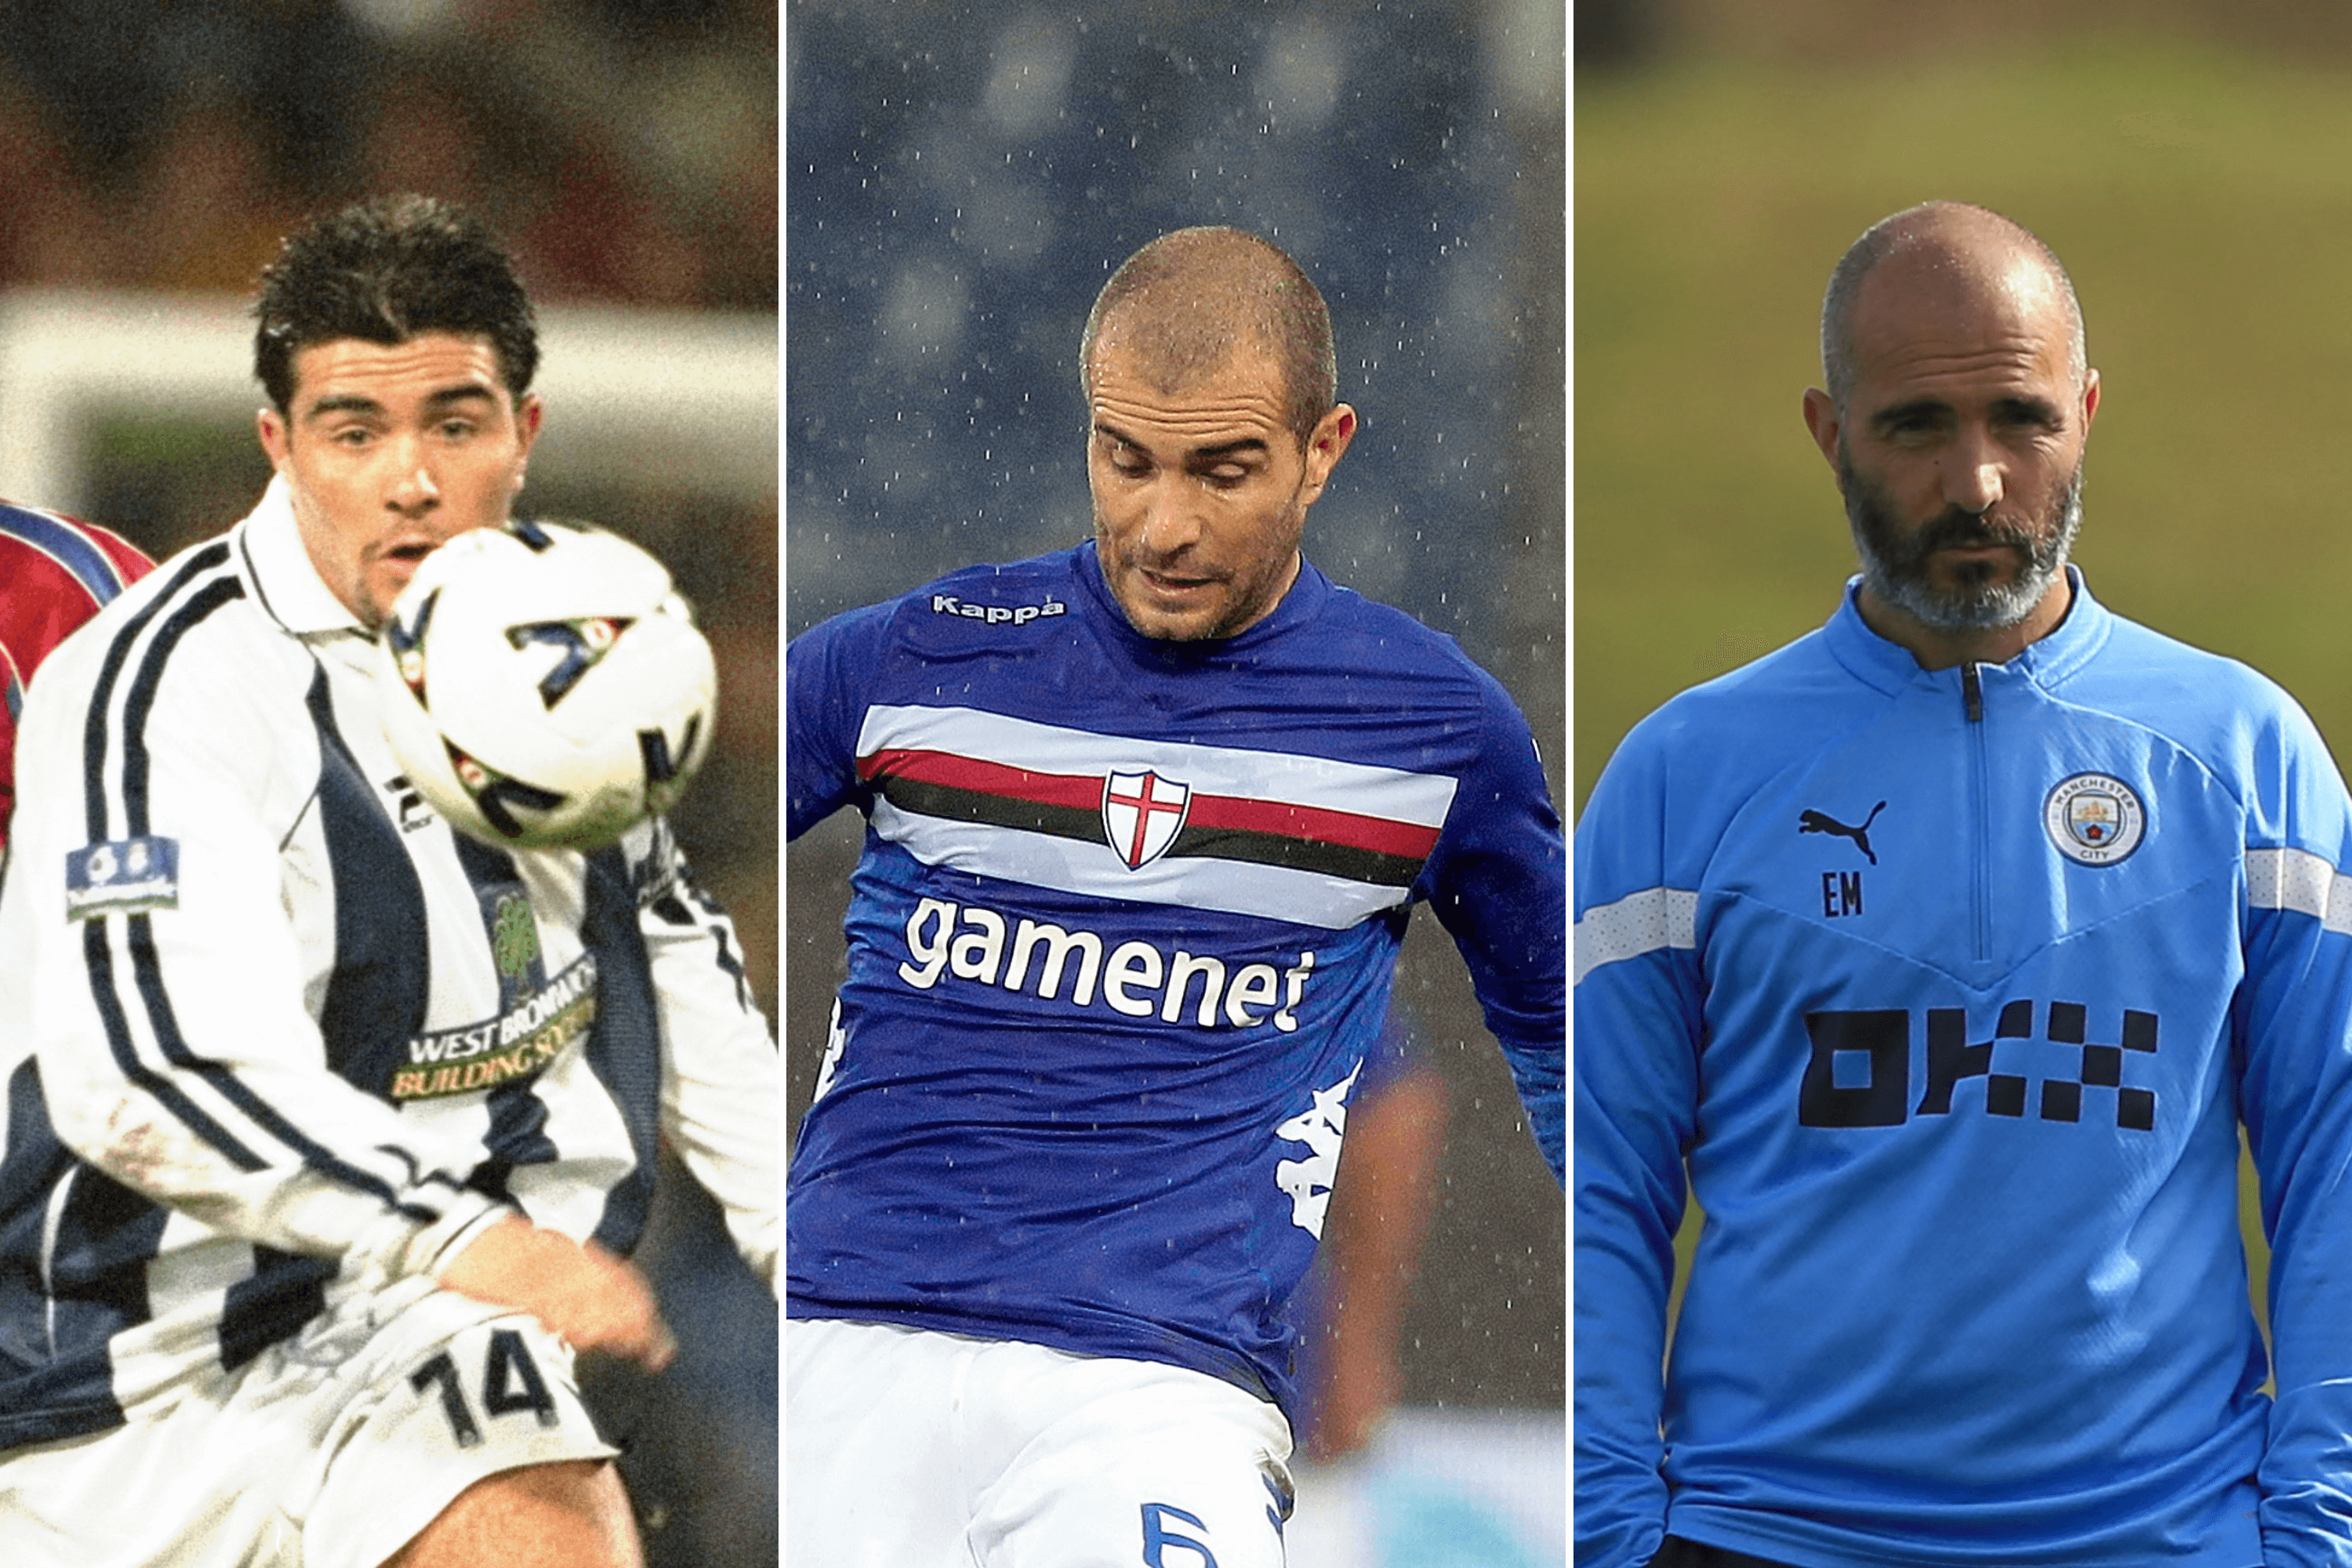 Enzo Maresca: Growing up with De Zerbi, playing like Gazza and why he's 'worth' the risk